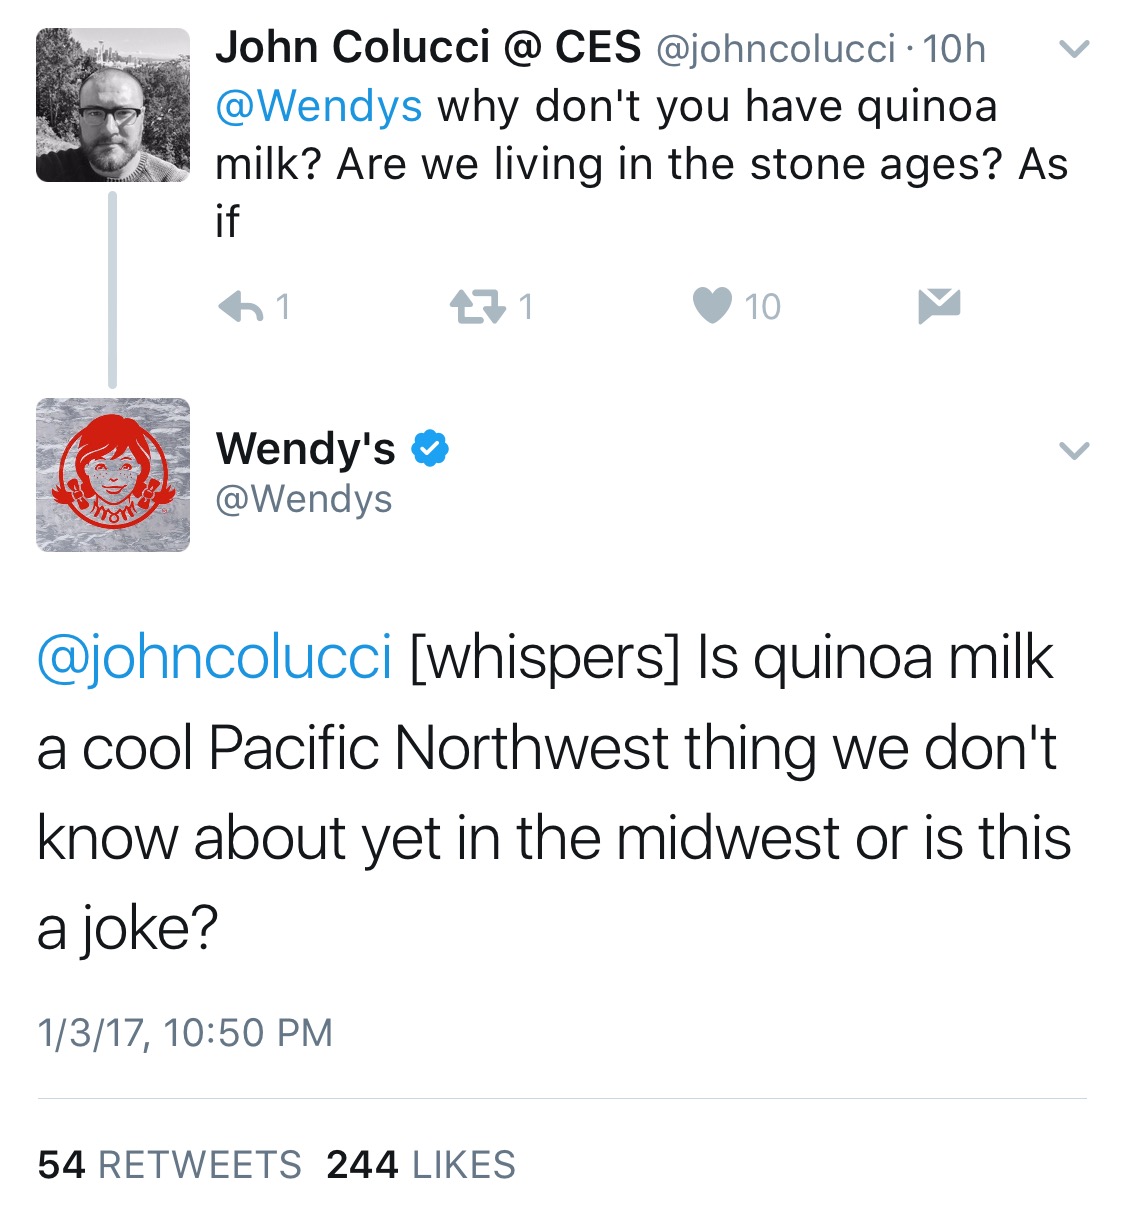 angle - John Colucci @ Ces 10h v why don't you have quinoa milk? Are we living in the stone ages? As 61 471 10 Wendy's whispers Is quinoa milk a cool Pacific Northwest thing we don't know about yet in the midwest or is this a joke? 1317, 54 244